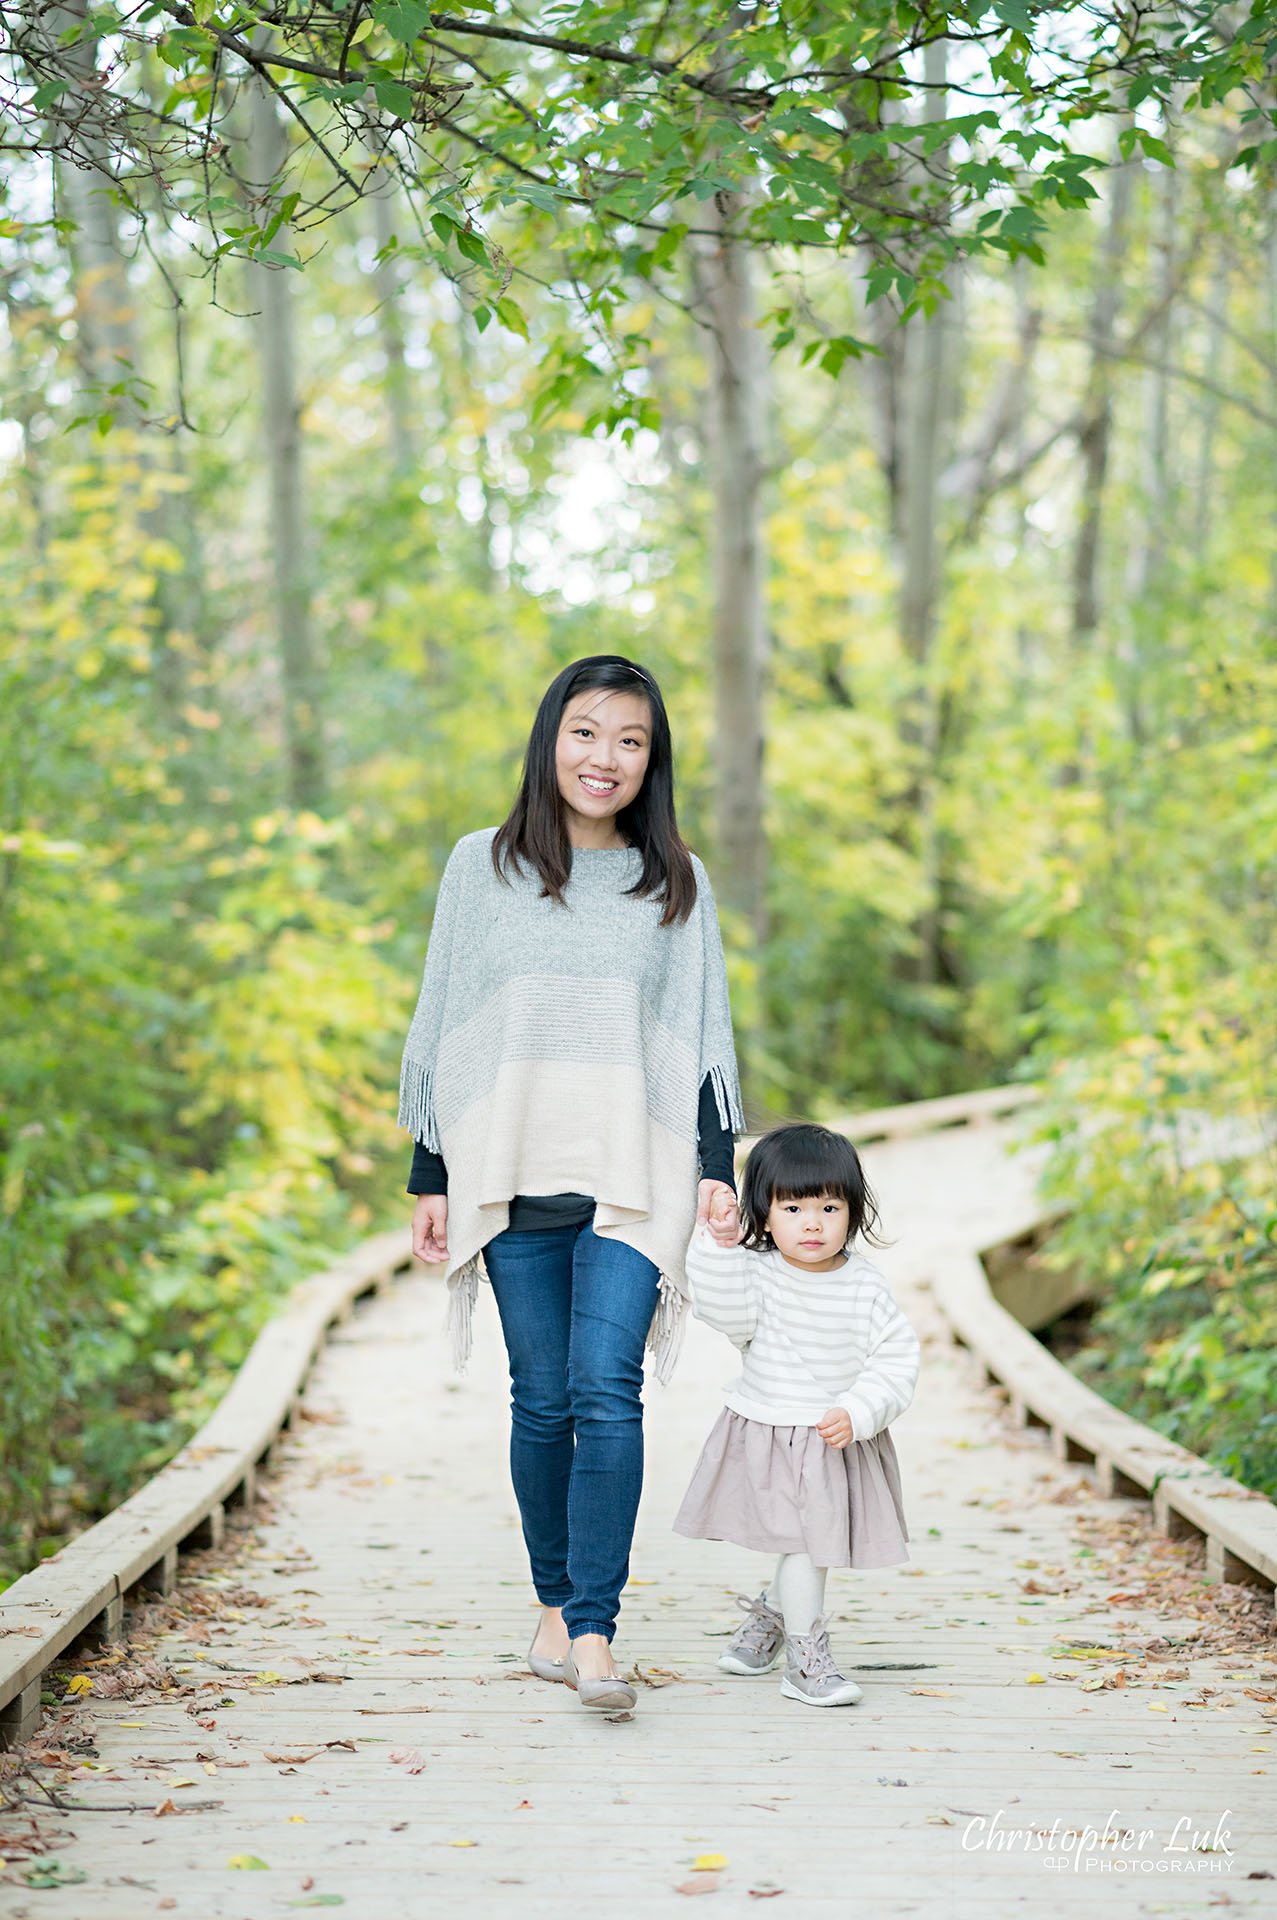 Christopher Luk Markham Family Photographer Autumn Leaves Fall Season Candid Photojournalistic Natural Bright Timeless Elegant Boardwalk Mother Daughter Holding Hands Walking Together